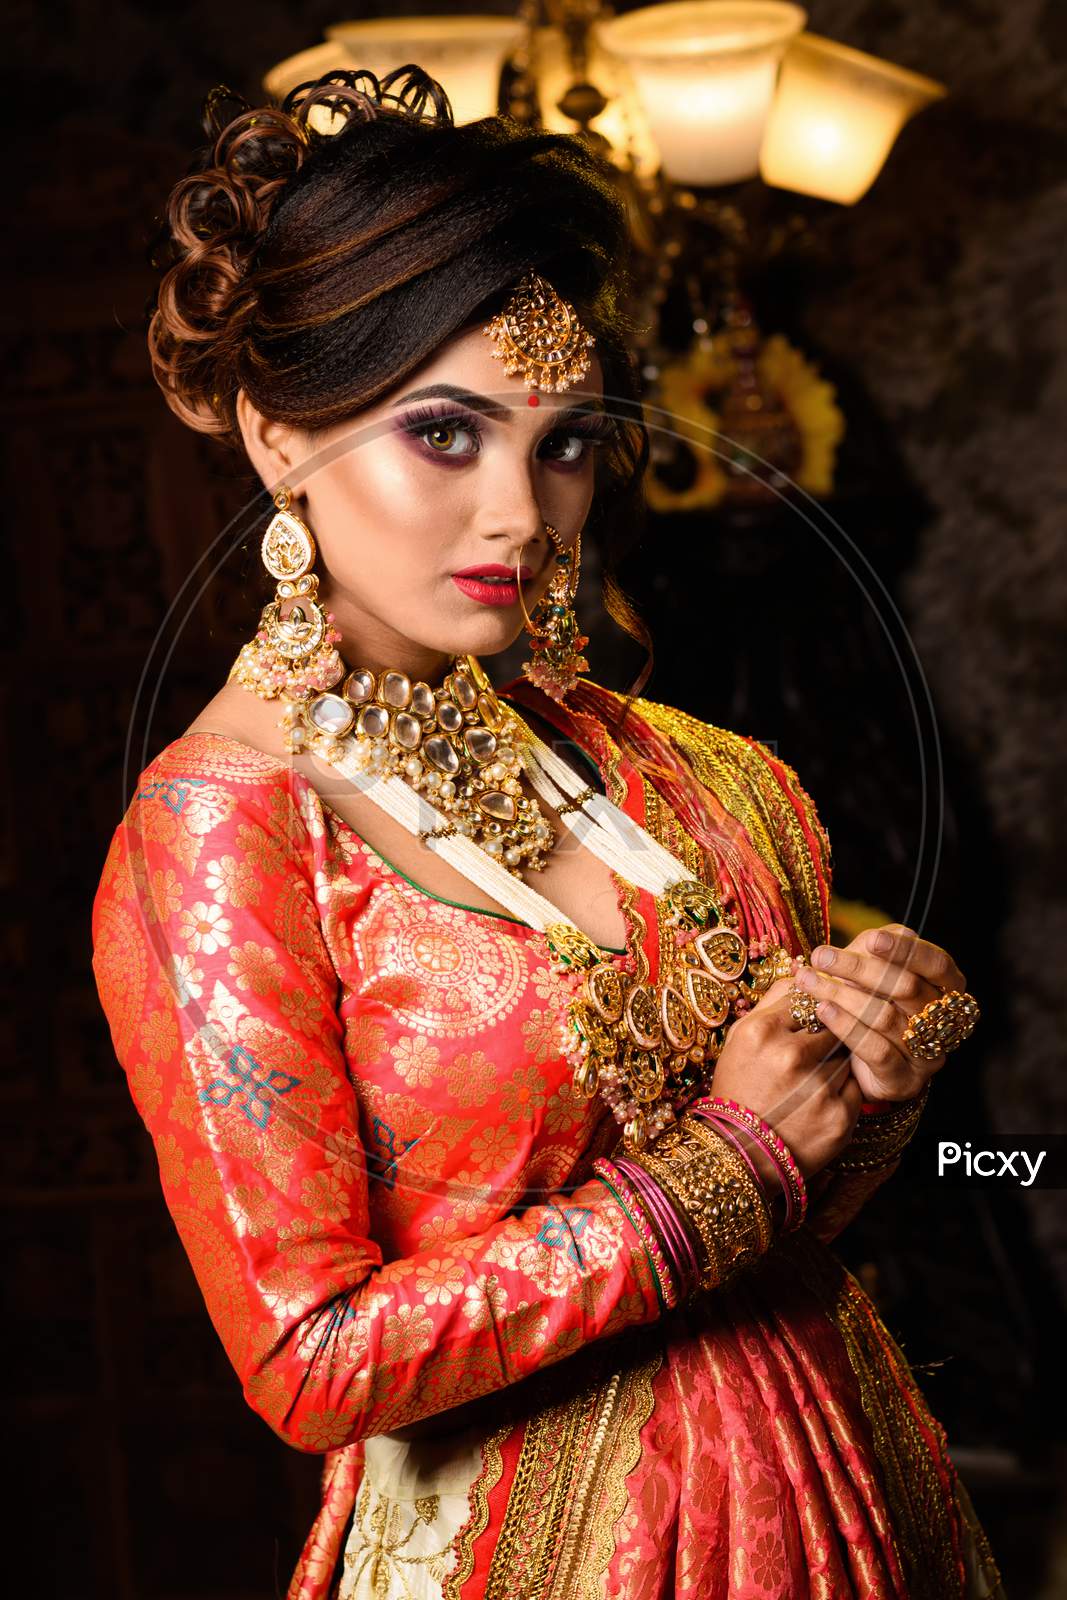 Image of Portrait Of Very Beautiful Young Indian Bride In Luxurious Bridal  Costume With Makeup And Heavy Jewellery In Studio Lighting Indoor. Wedding  Fashion.-VG515512-Picxy